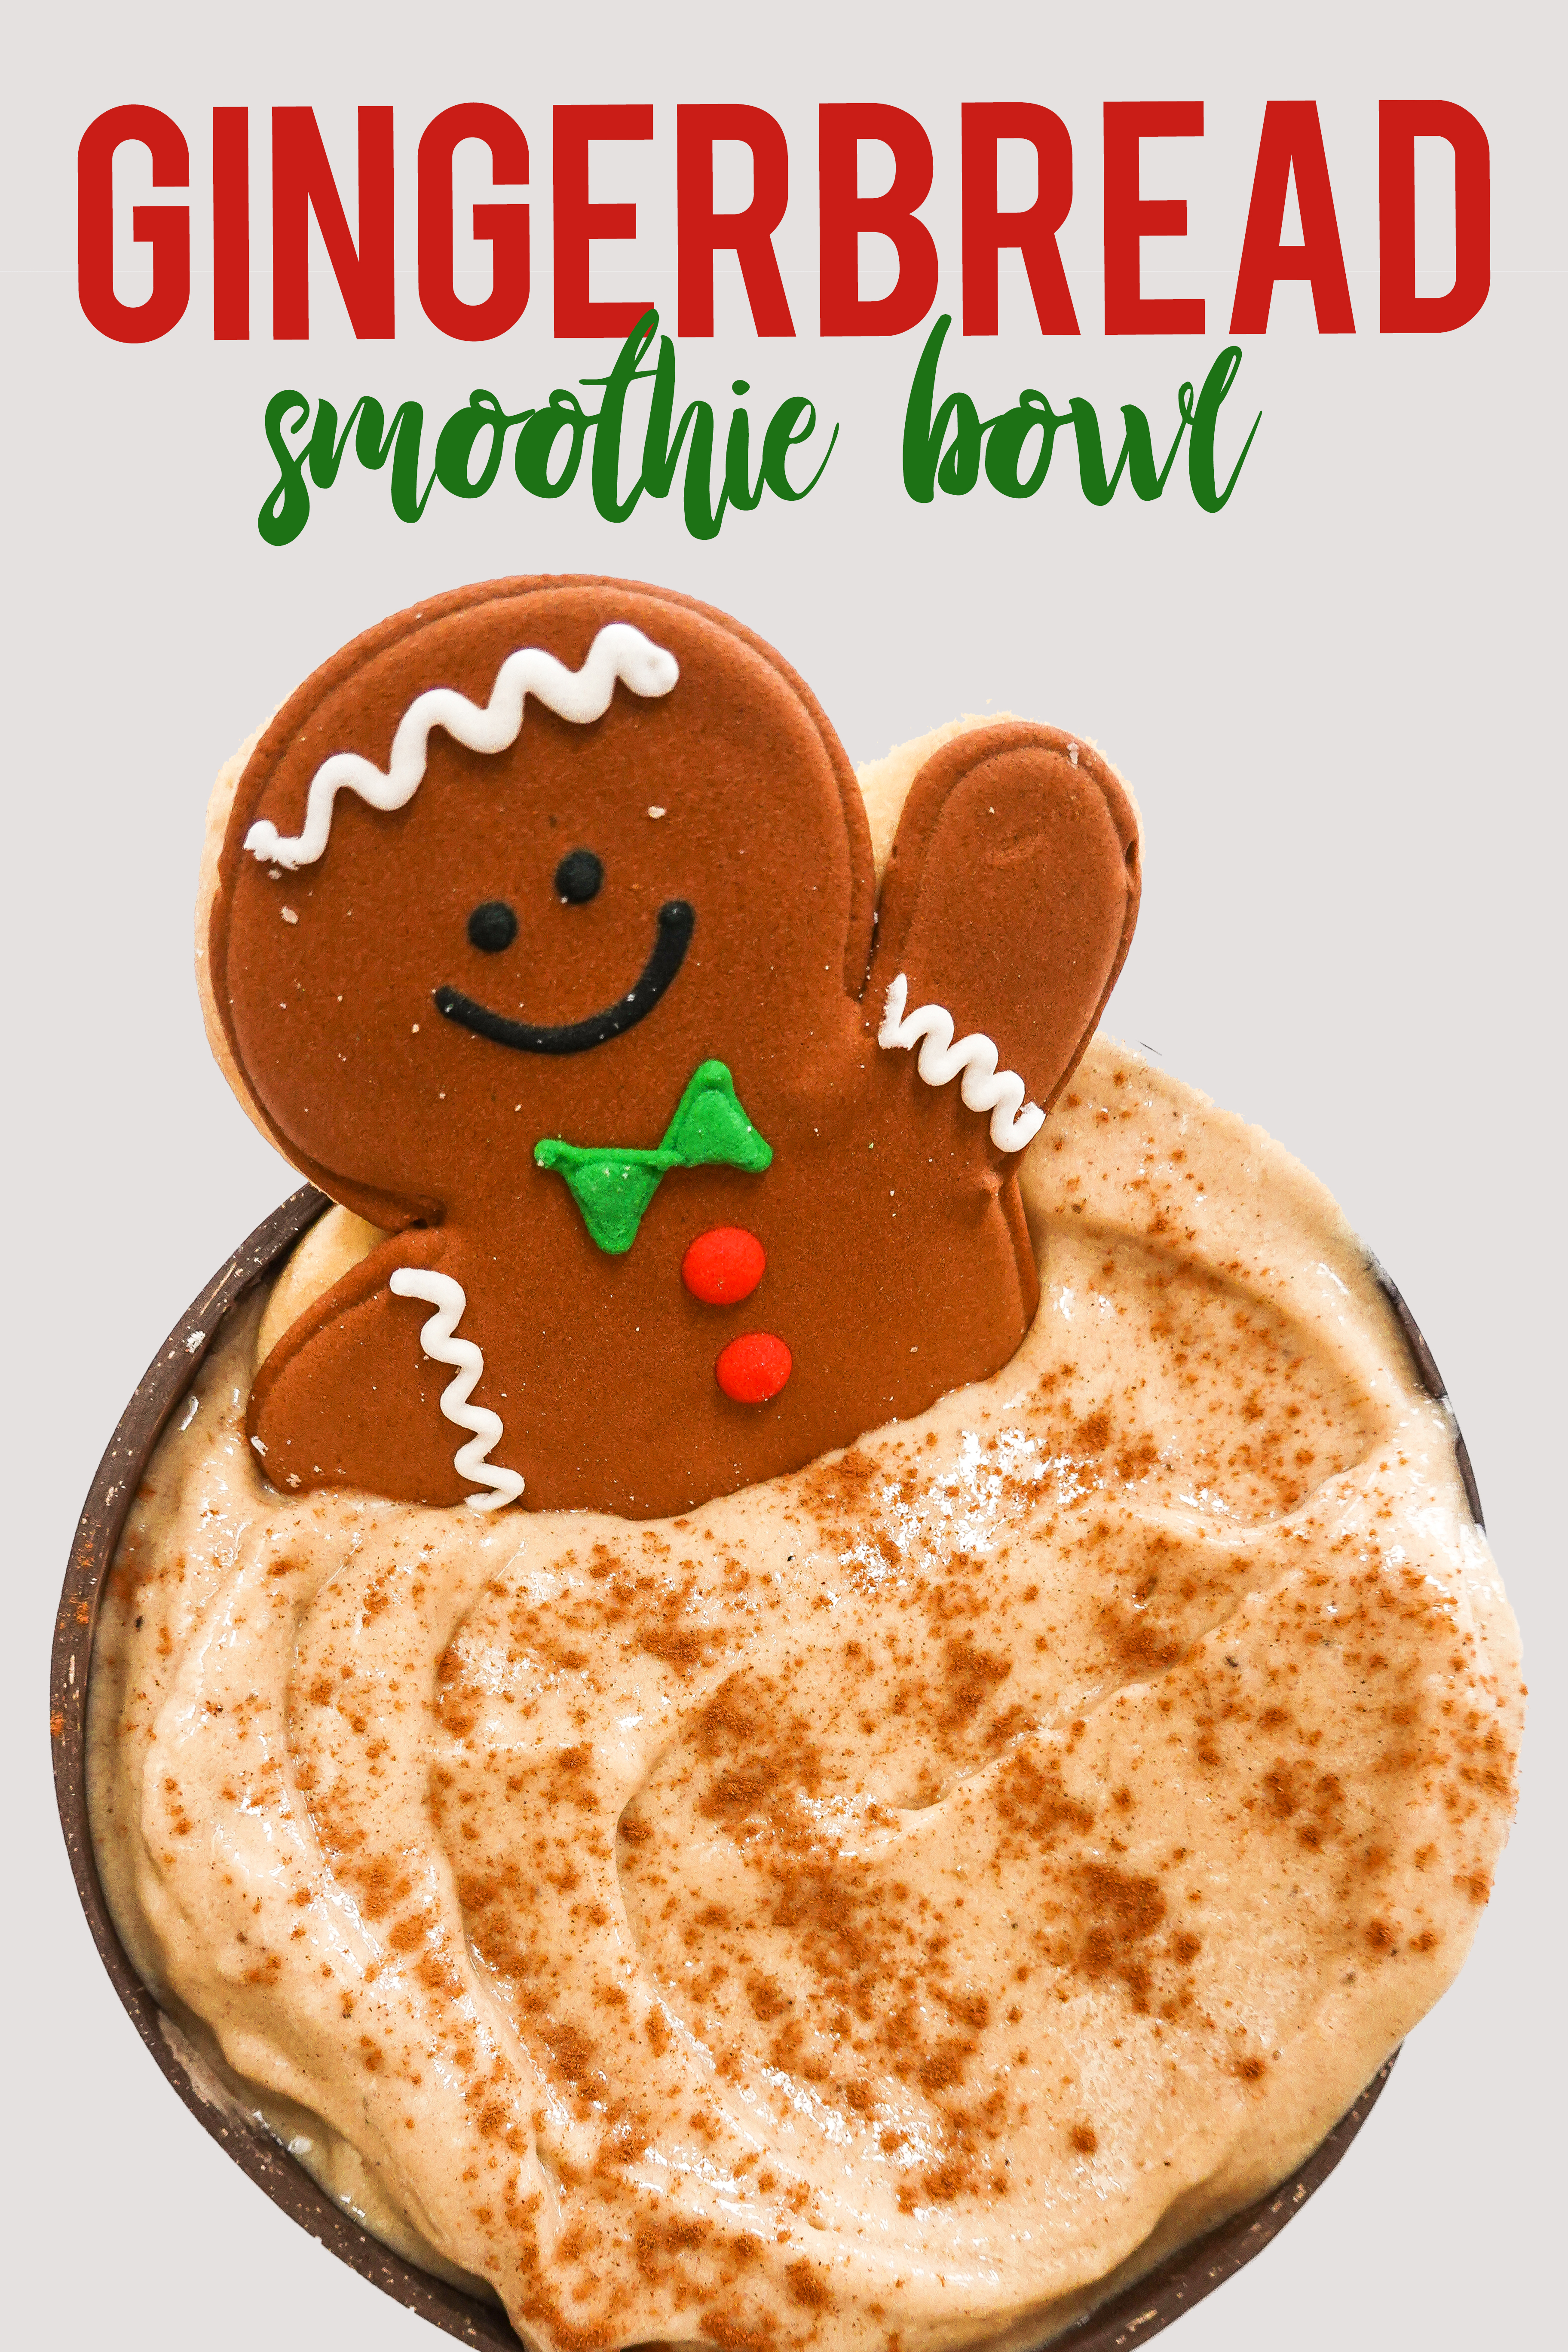 Gingerbread Smoothie Bowl